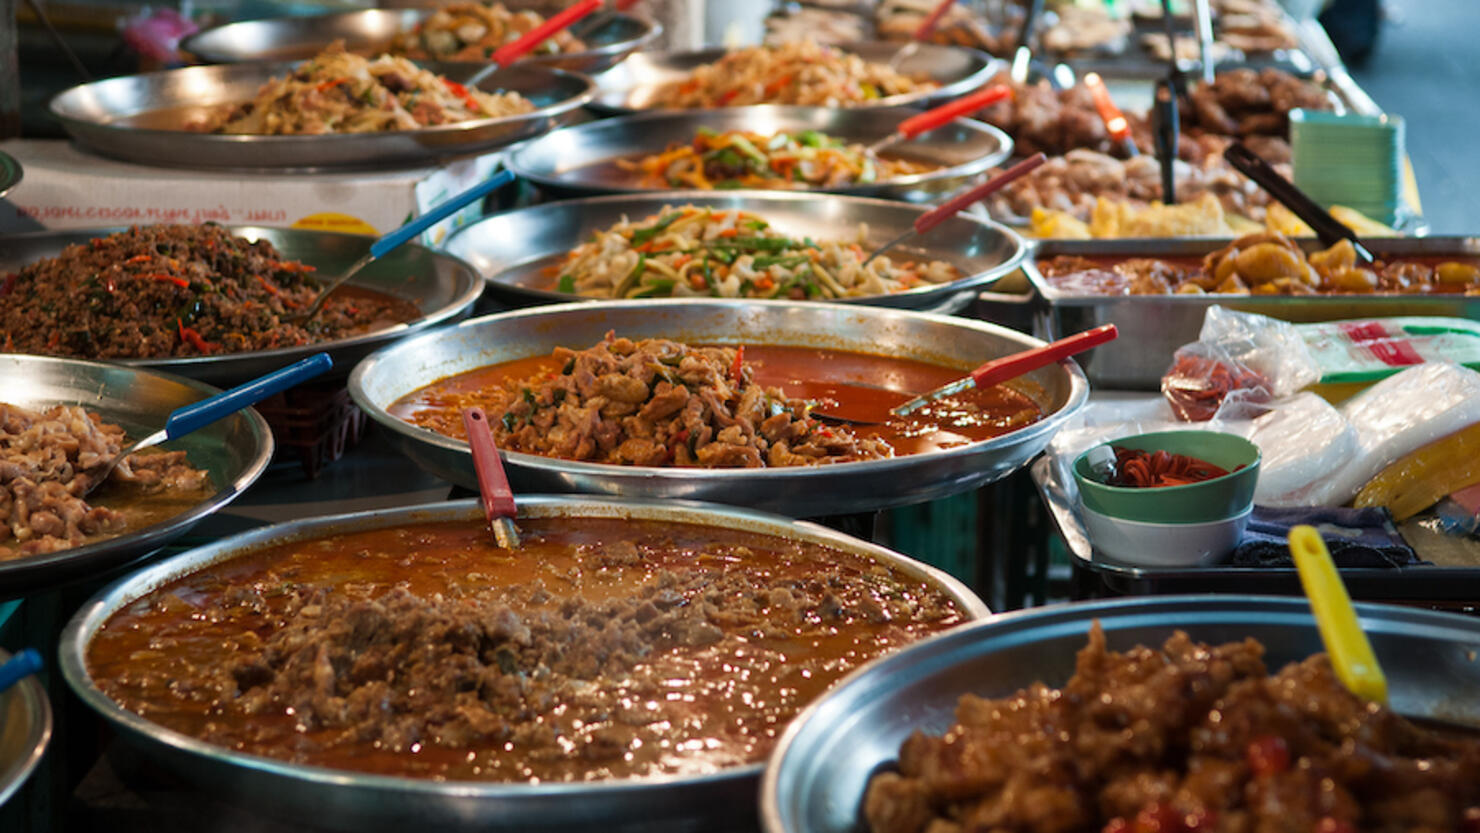 Food On Table At Market Stall